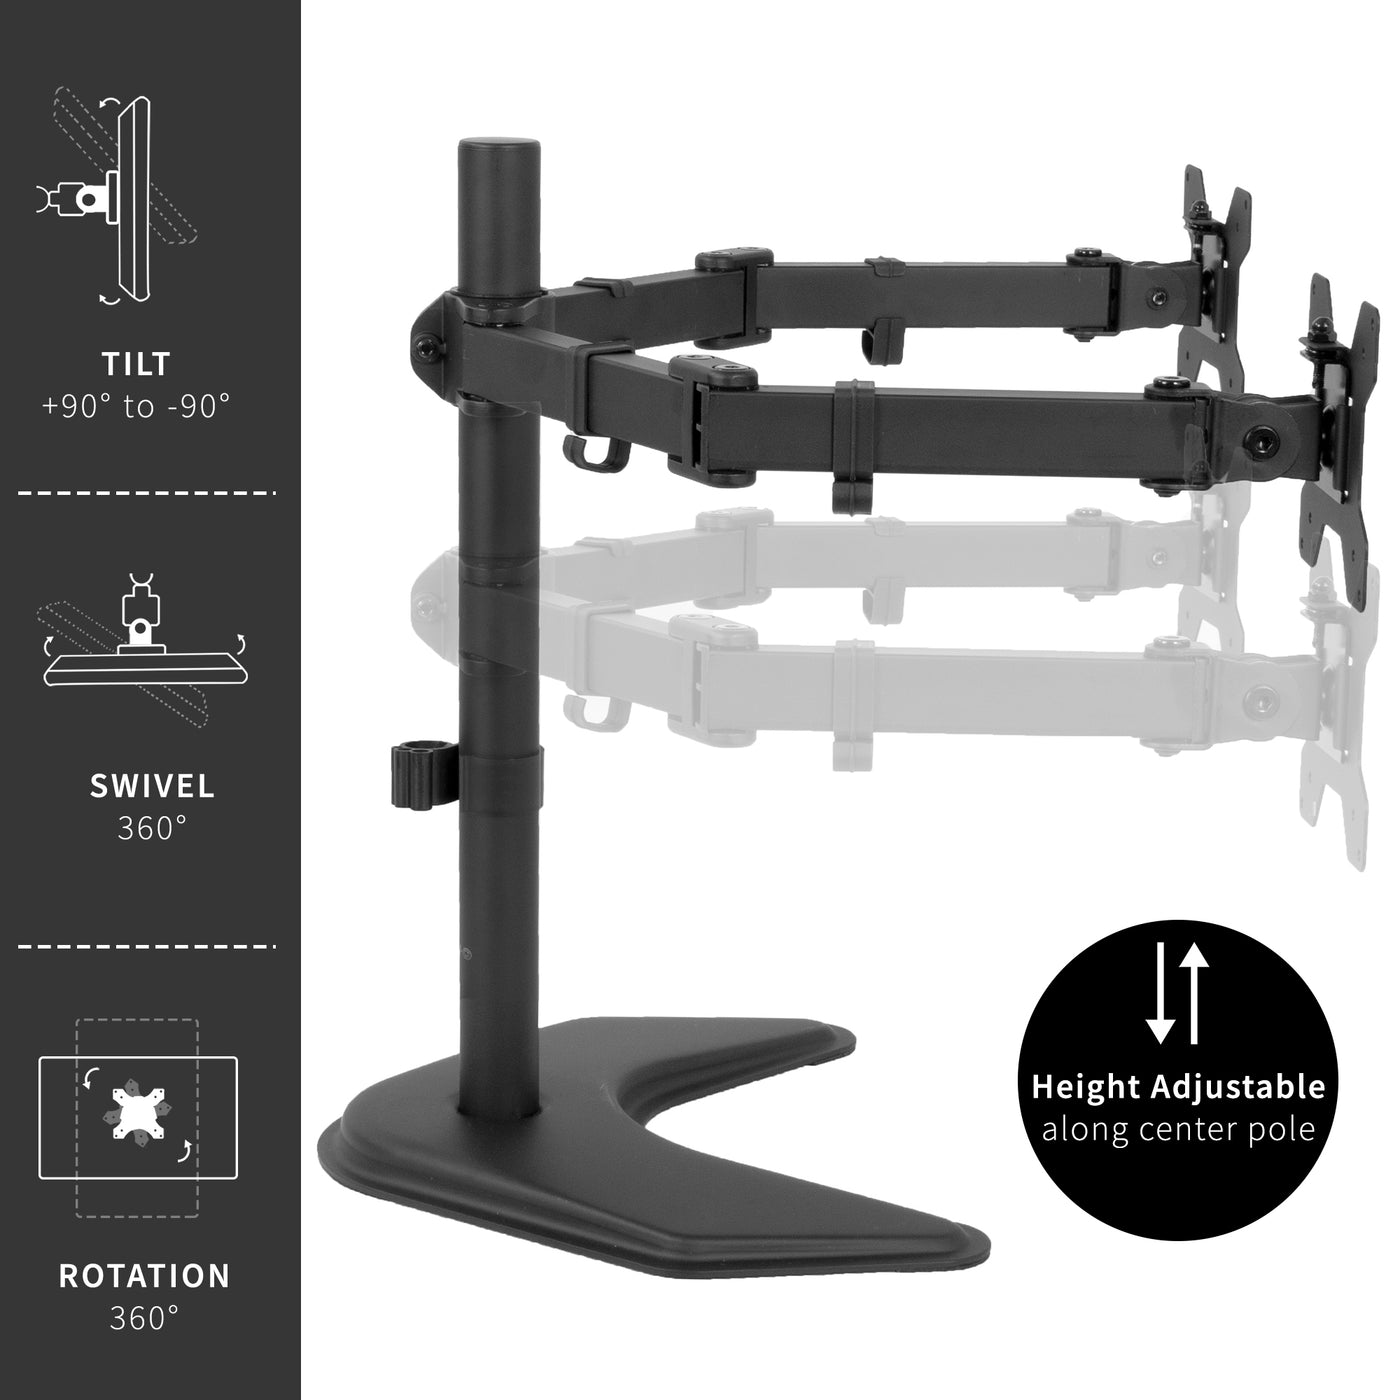 Constructed of high-grade steel, this dual monitor desk stand was built to resist scratches and support two 13" to 32" LCD screens weighing up to 22 pounds each.